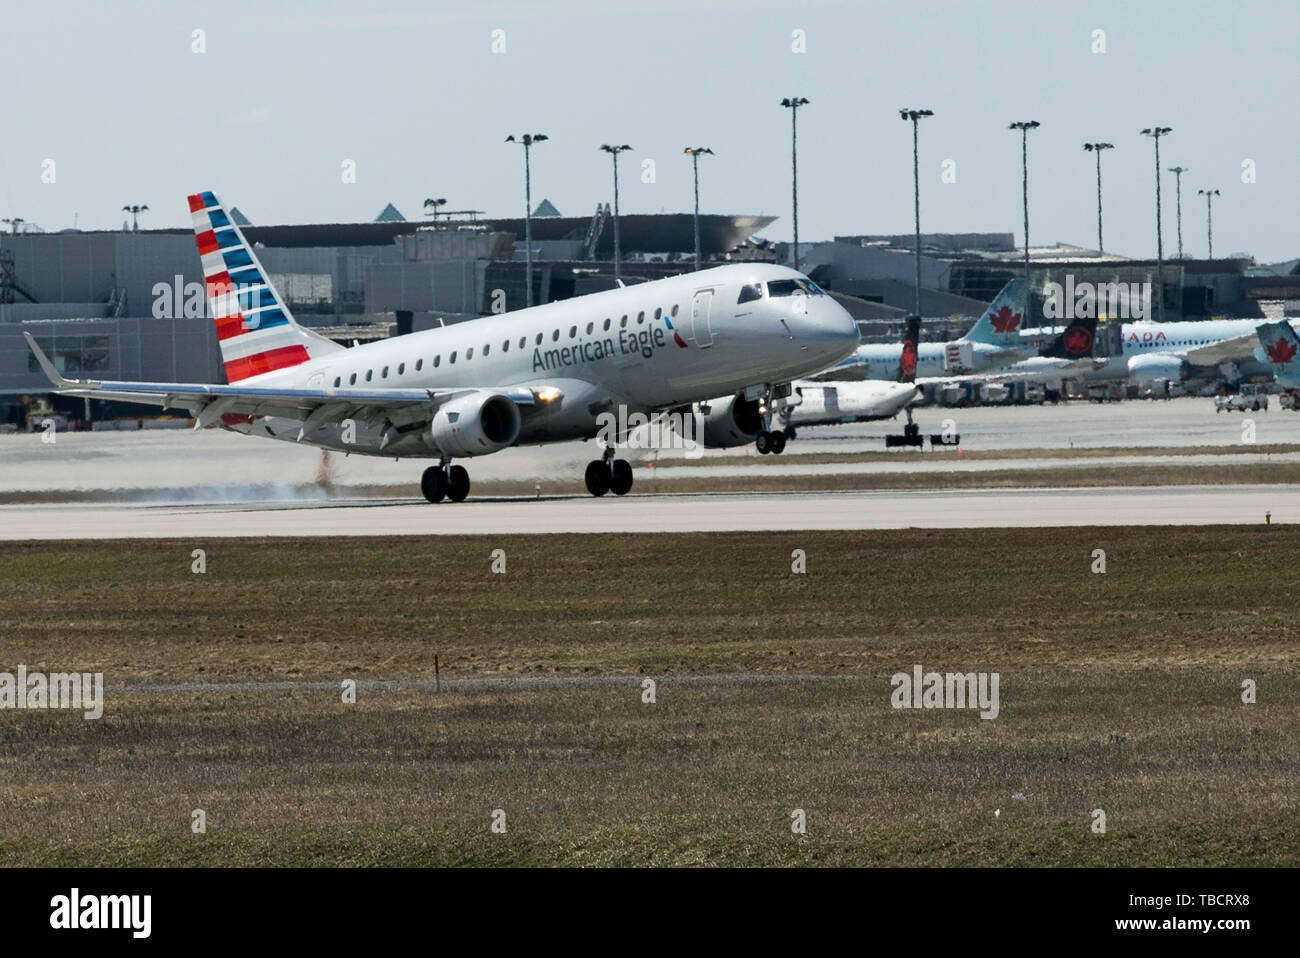 A American Eagle Embraer ERJ 170 airplane is seen landing at Montréal-Pierre Elliott Trudeau International Airport in Montreal, Quebec, Canada, on Apr Stock Photo